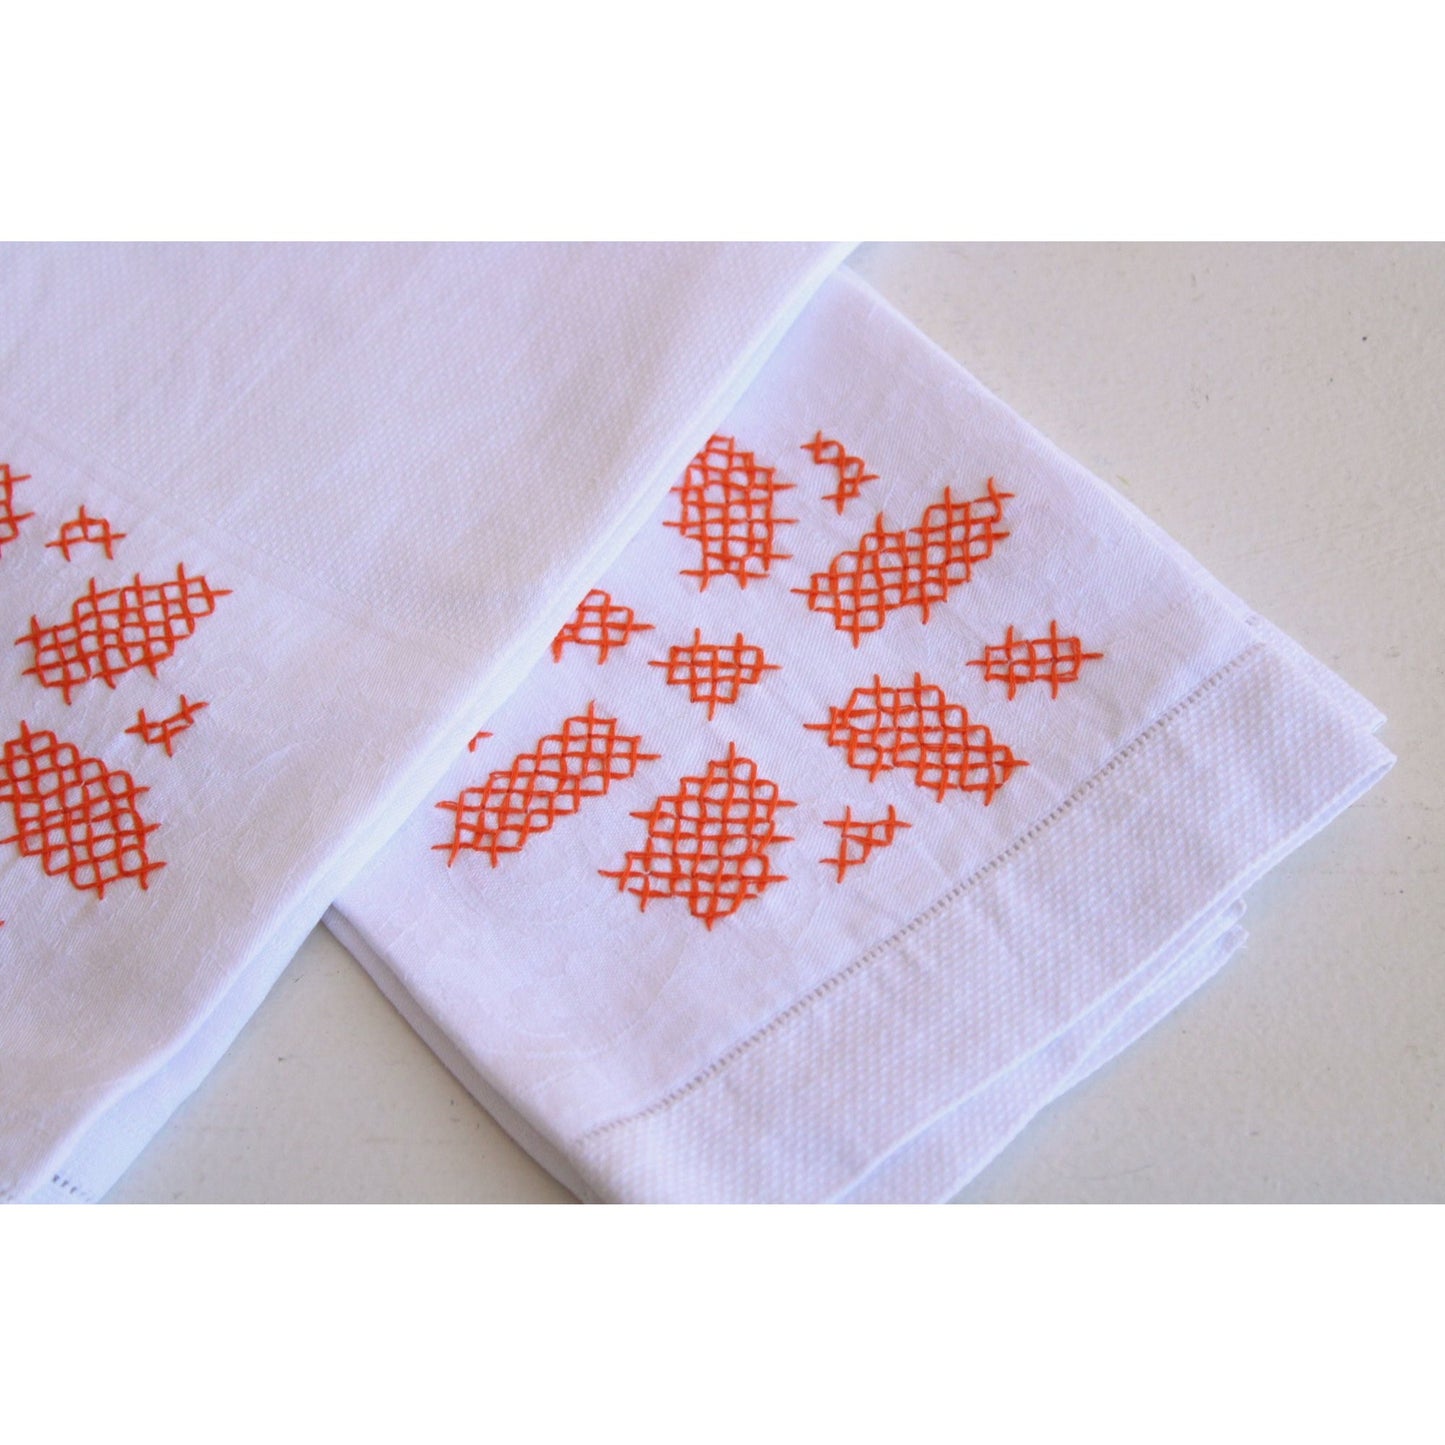 Vintage 1960s White Linen Set Of Hand Towels With Orange Stitching